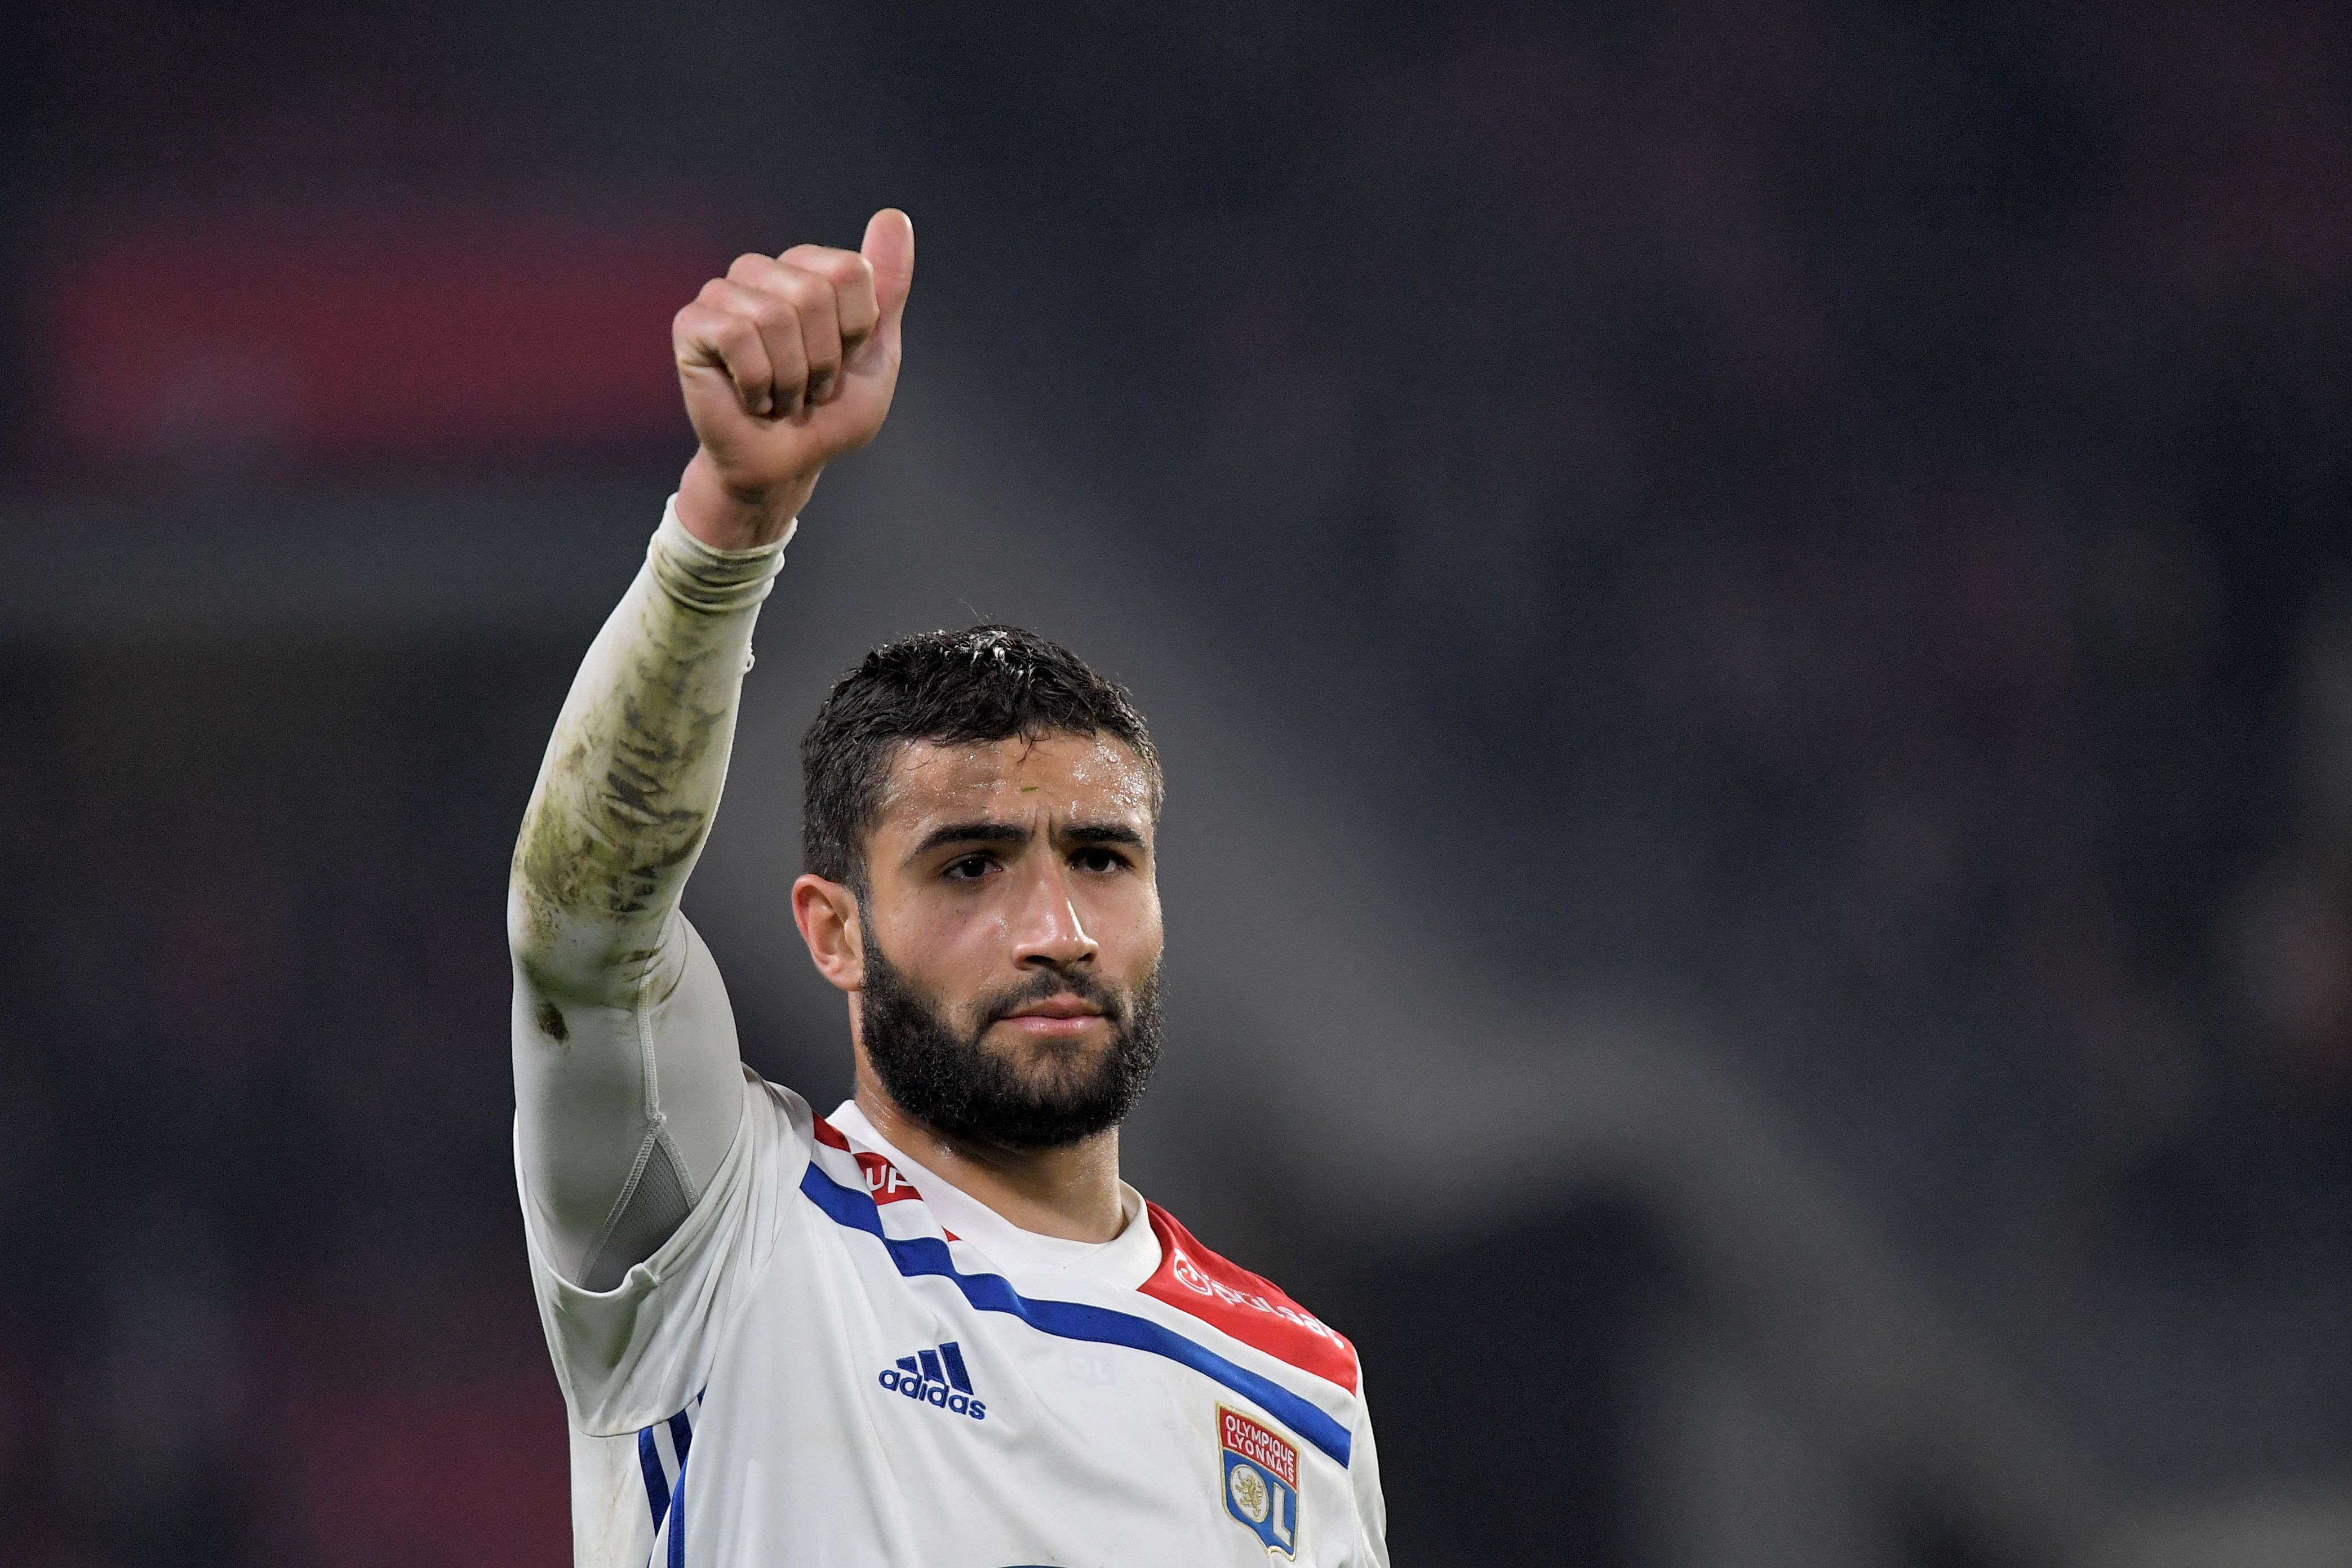 Lyon's French midfielder Nabil Fekir celebrates after Lyon won the French L1 football match Stade Rennais vs Olympique Lyonnais (OL), on March 29, 2019 at the Roazhon Park stadium in Rennes, western France. (Photo by LOIC VENANCE / AFP)        (Photo credit should read LOIC VENANCE/AFP/Getty Images)